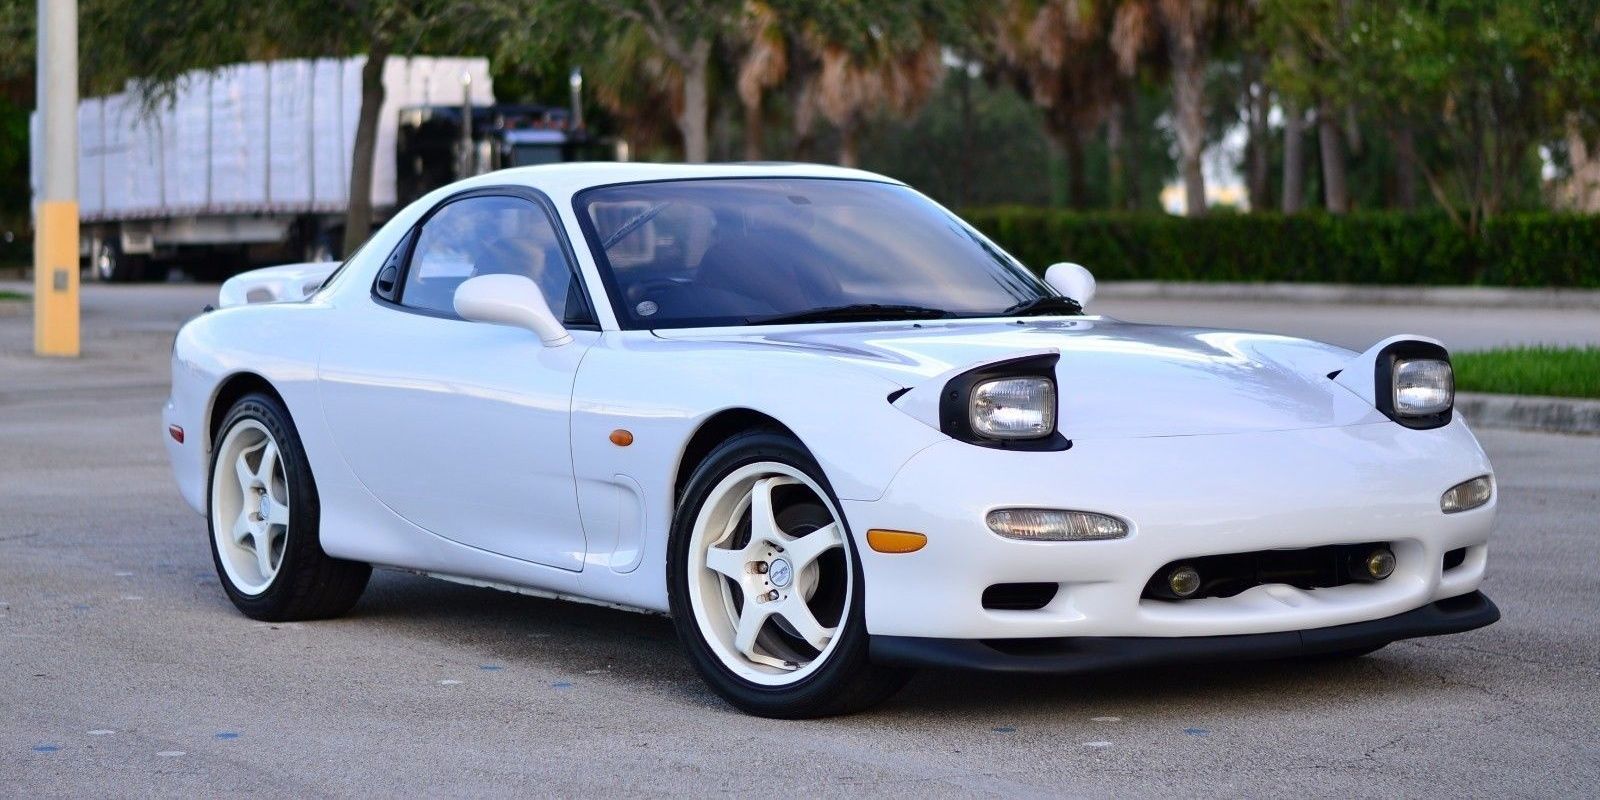 A while parked 1992 Mazda RX-7